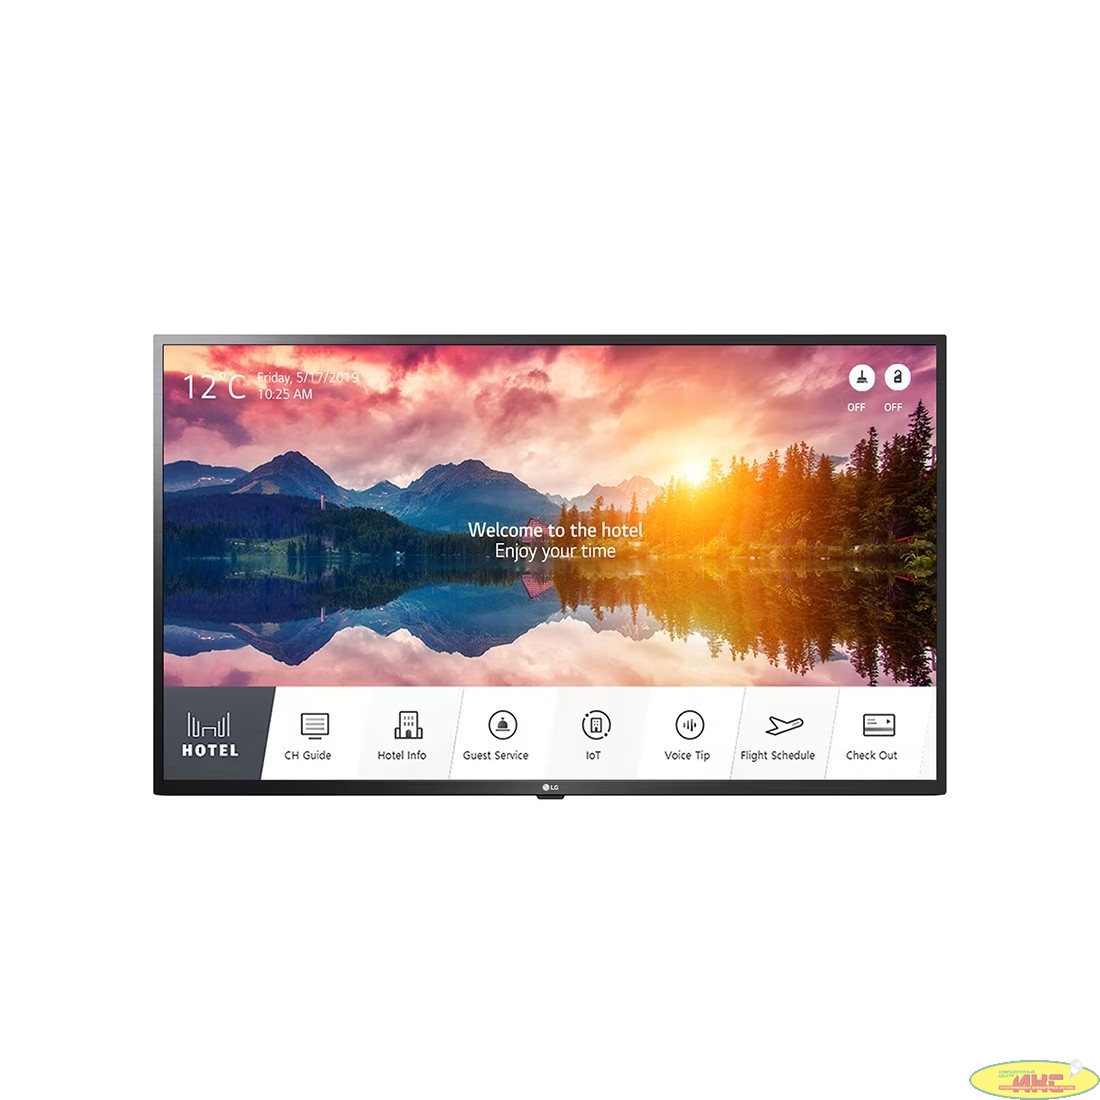 LG 65" 65US662H0ZC {LED UHD, Ceramic BK, DVB-T2/C/S2, HDR 10pro, Pro:Centric, WebOS 5.0, No stand incl "()/ (Ghz)/Mb/Gb/Ext:war}